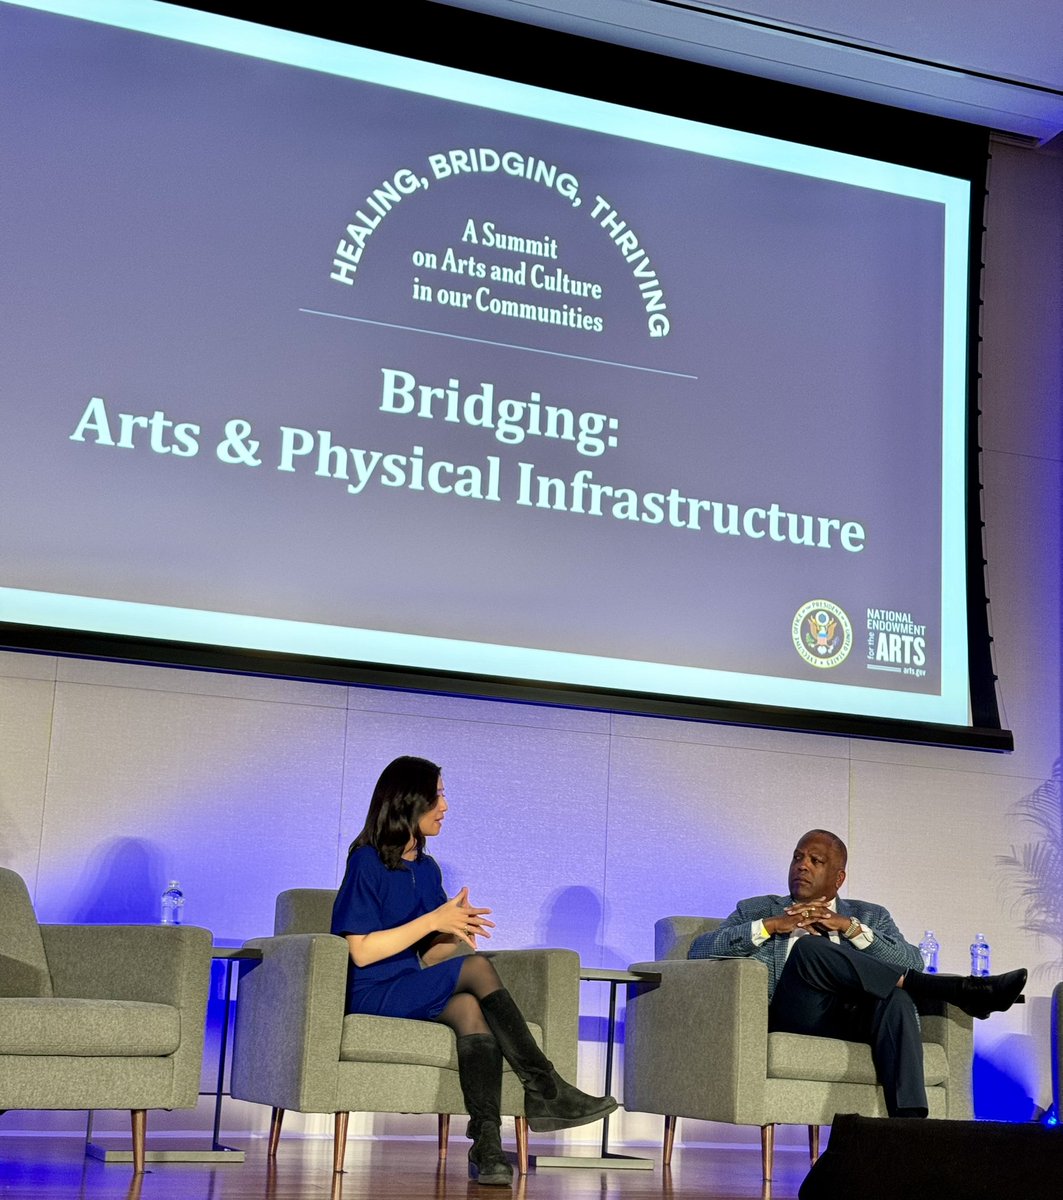 Watch Now! Director Benjamin & @MayorWu in conversation on elevating the arts as part of the @NEAarts and @WhiteHouse Summit! A pivotal moment in highlighting that the arts are essential to progress! Watch live at arts.gov. #HealBridgeThrive